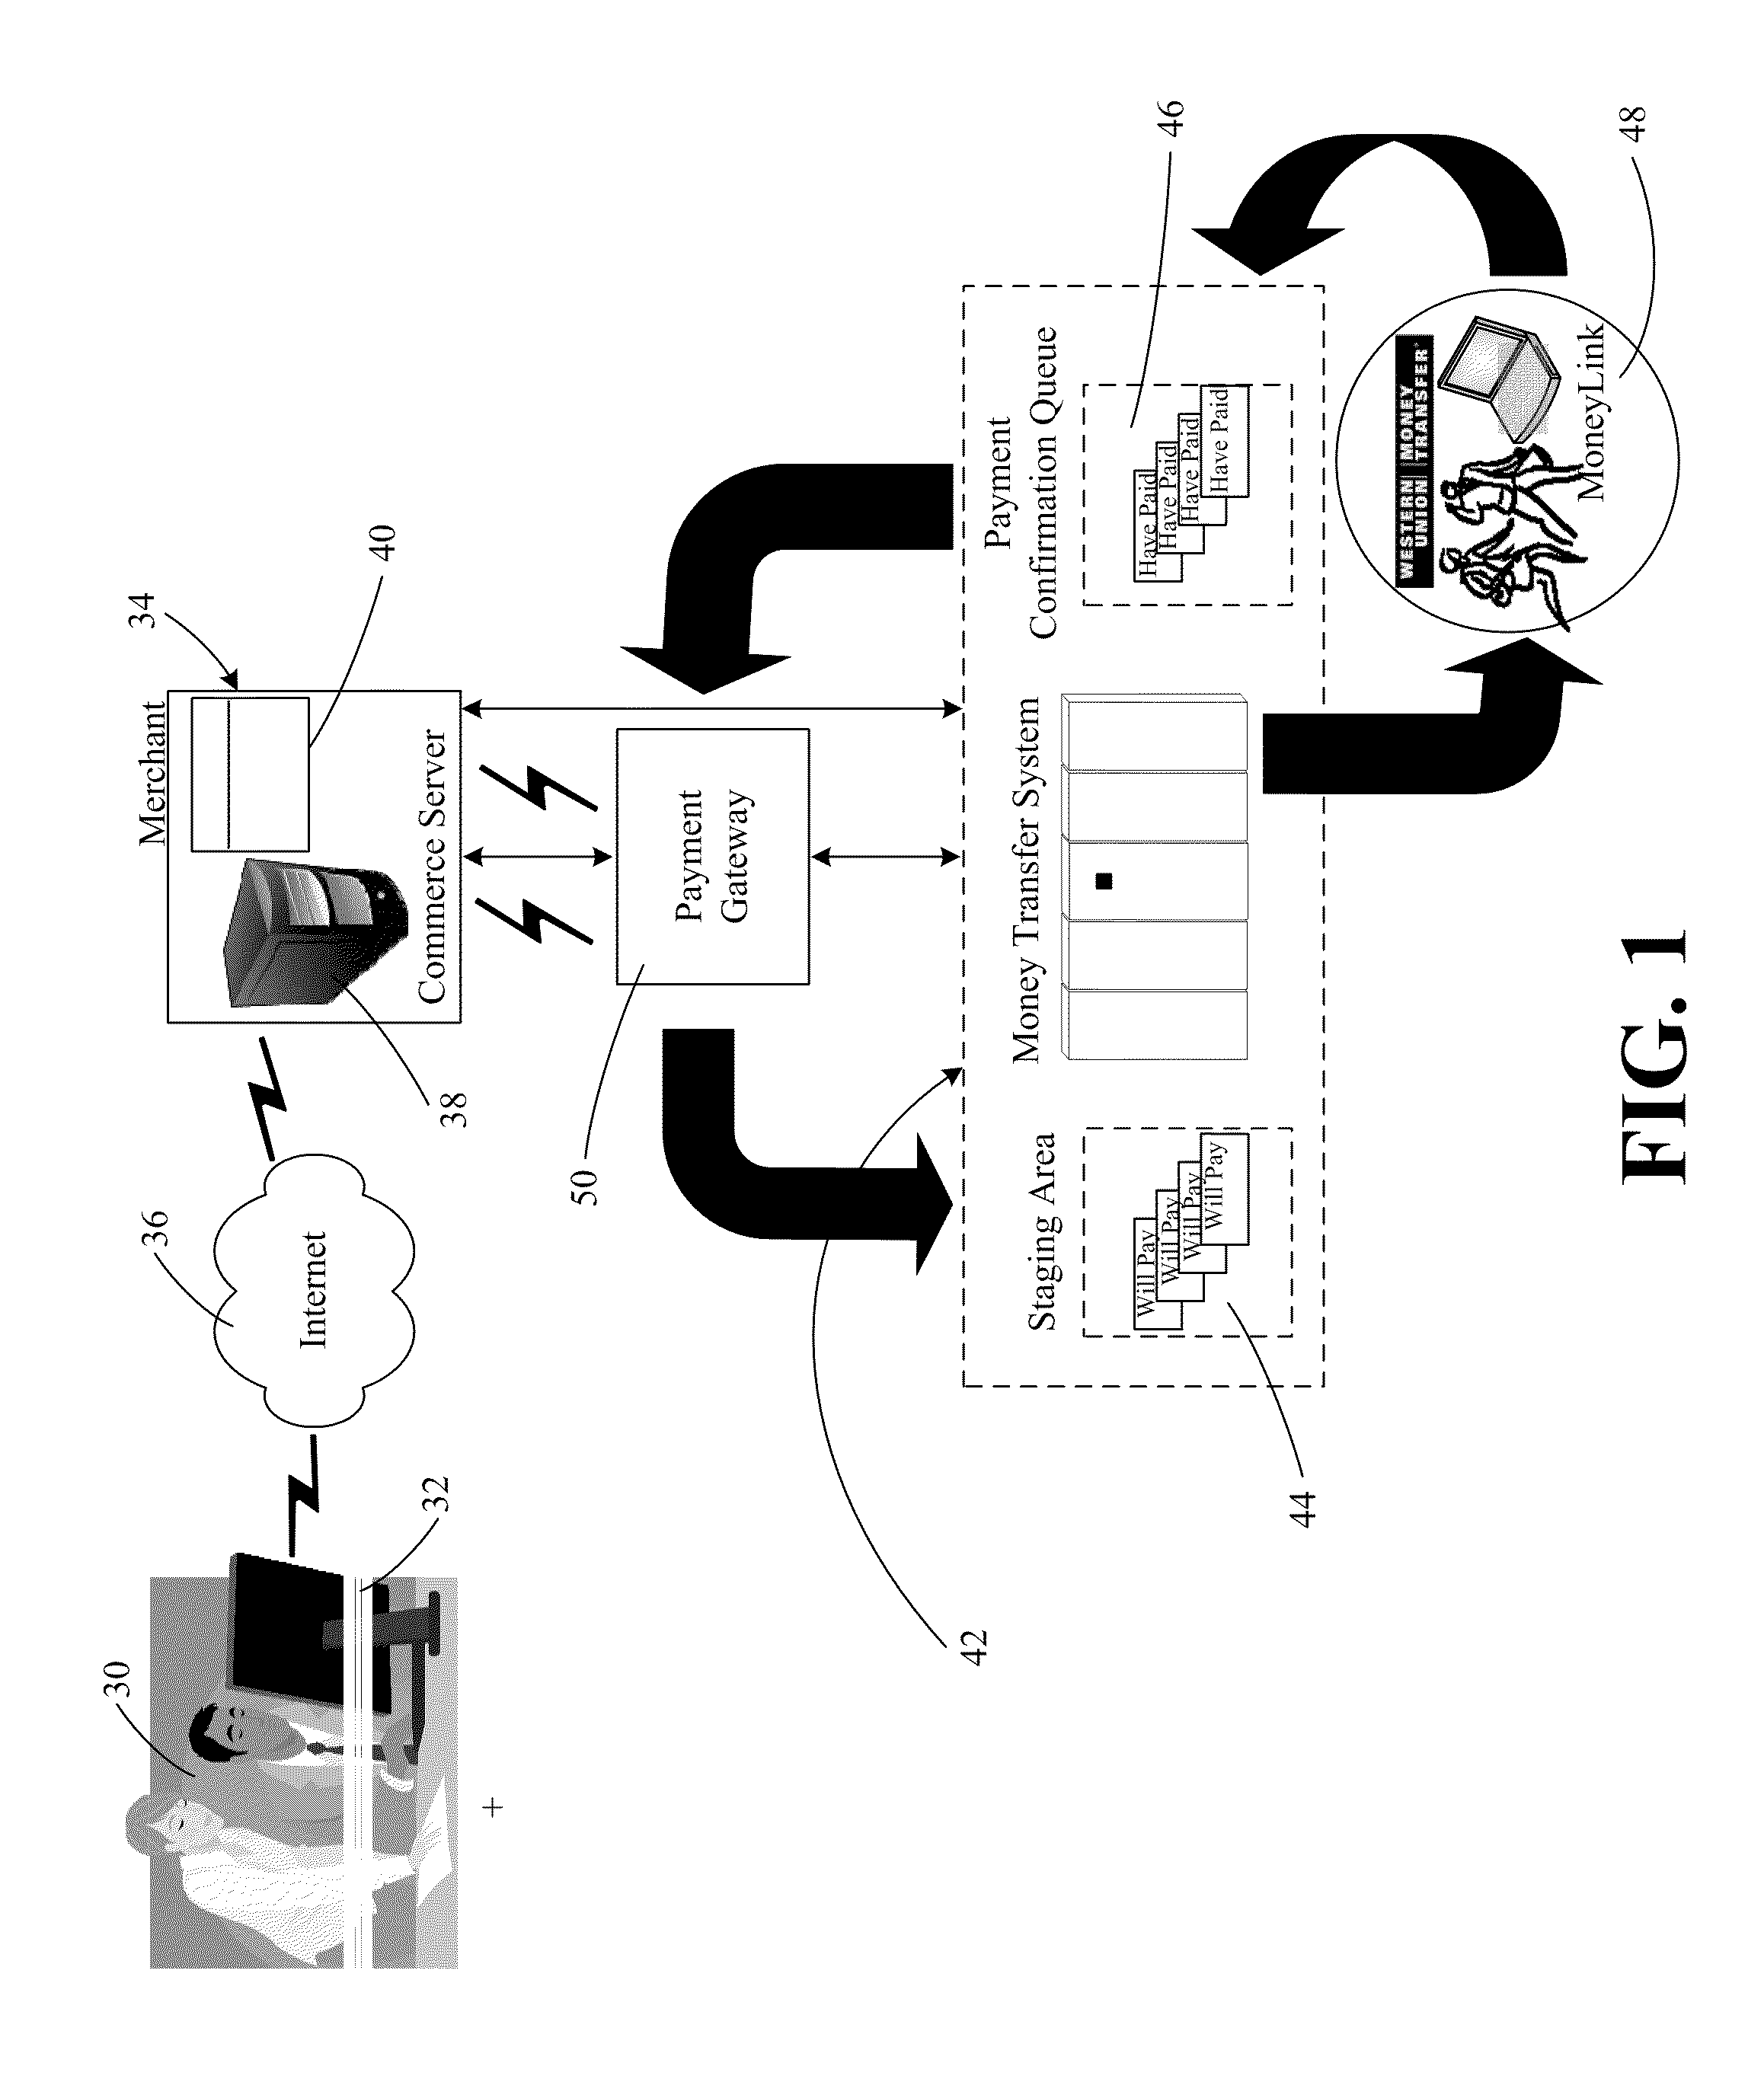 Method for Facilitating Payment of a Computerized Transaction